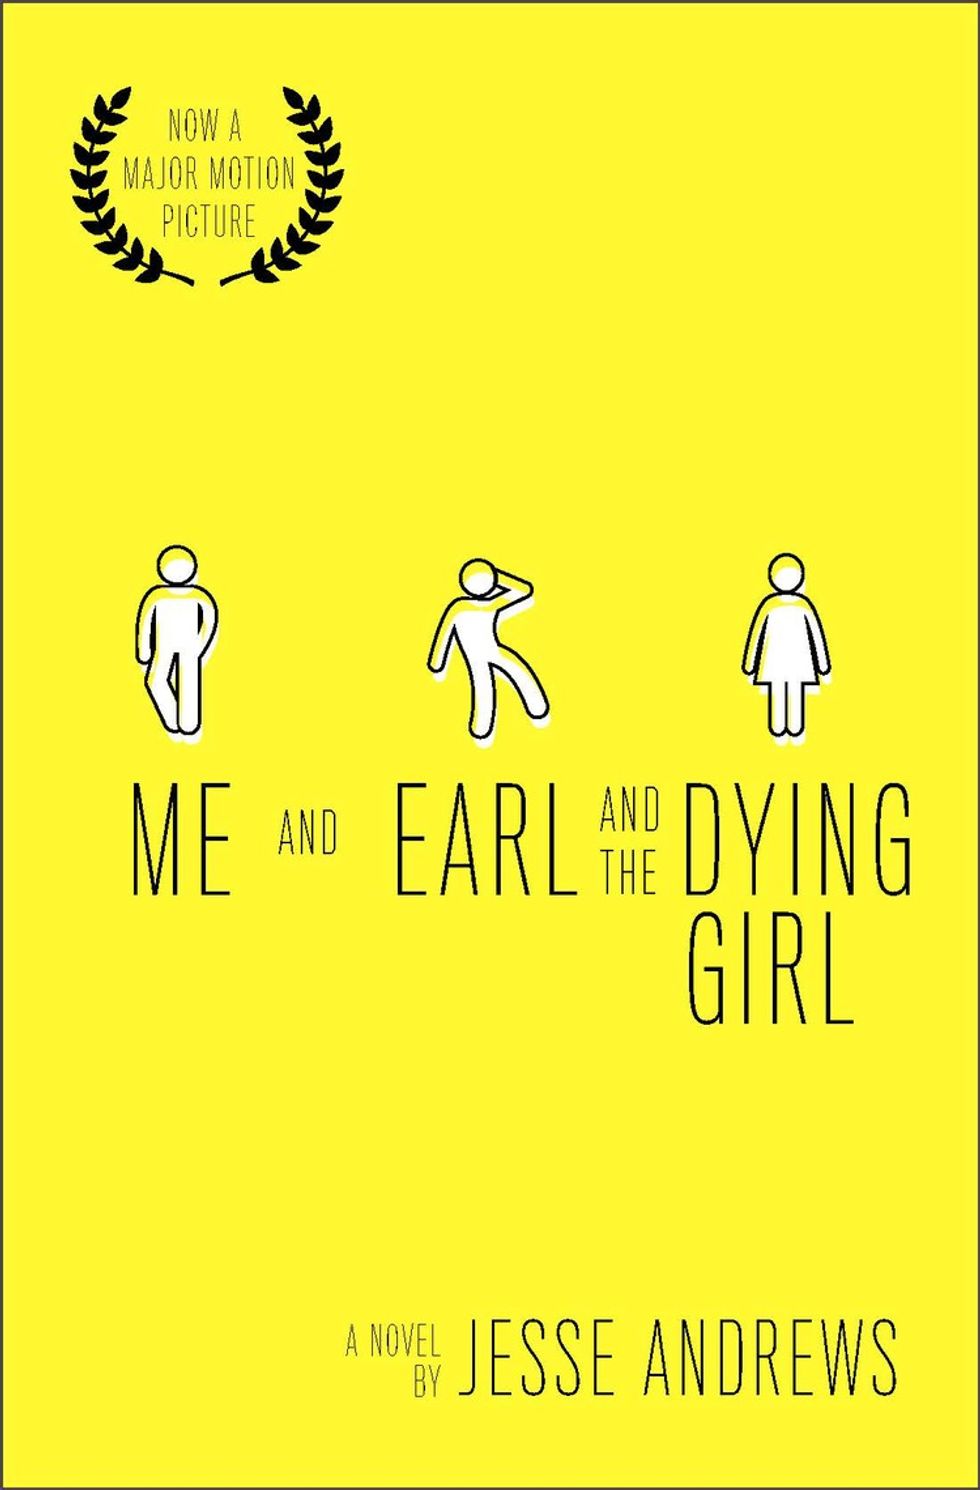 A Book Review Of 'Me And Earl And The Dying Girl'